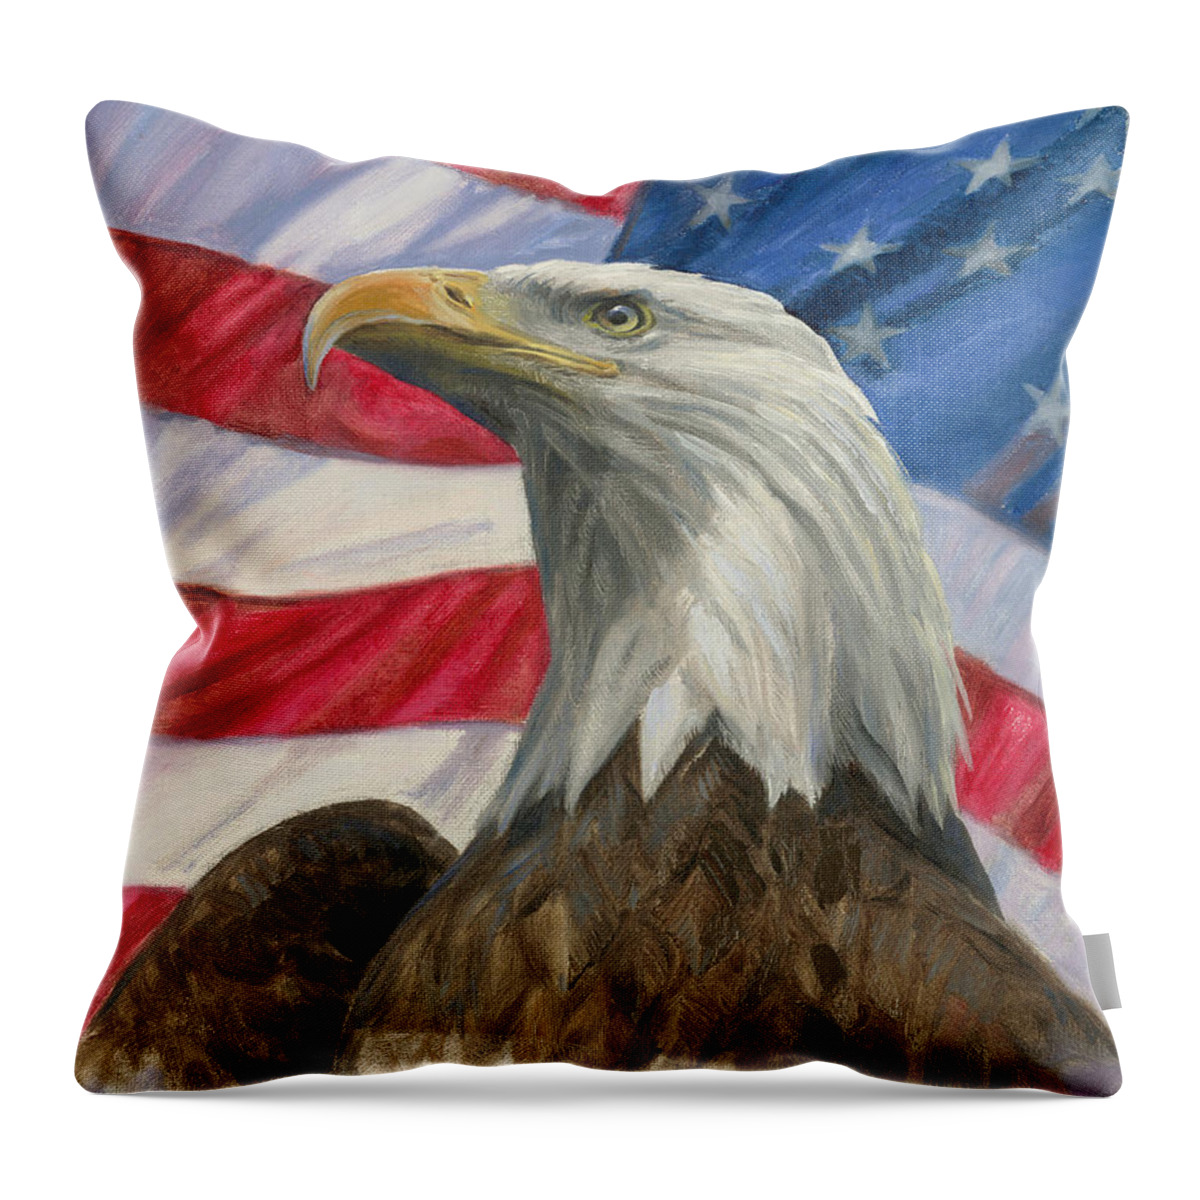 American Eagle Throw Pillow featuring the painting Independence Day by Gregory Doroshenko